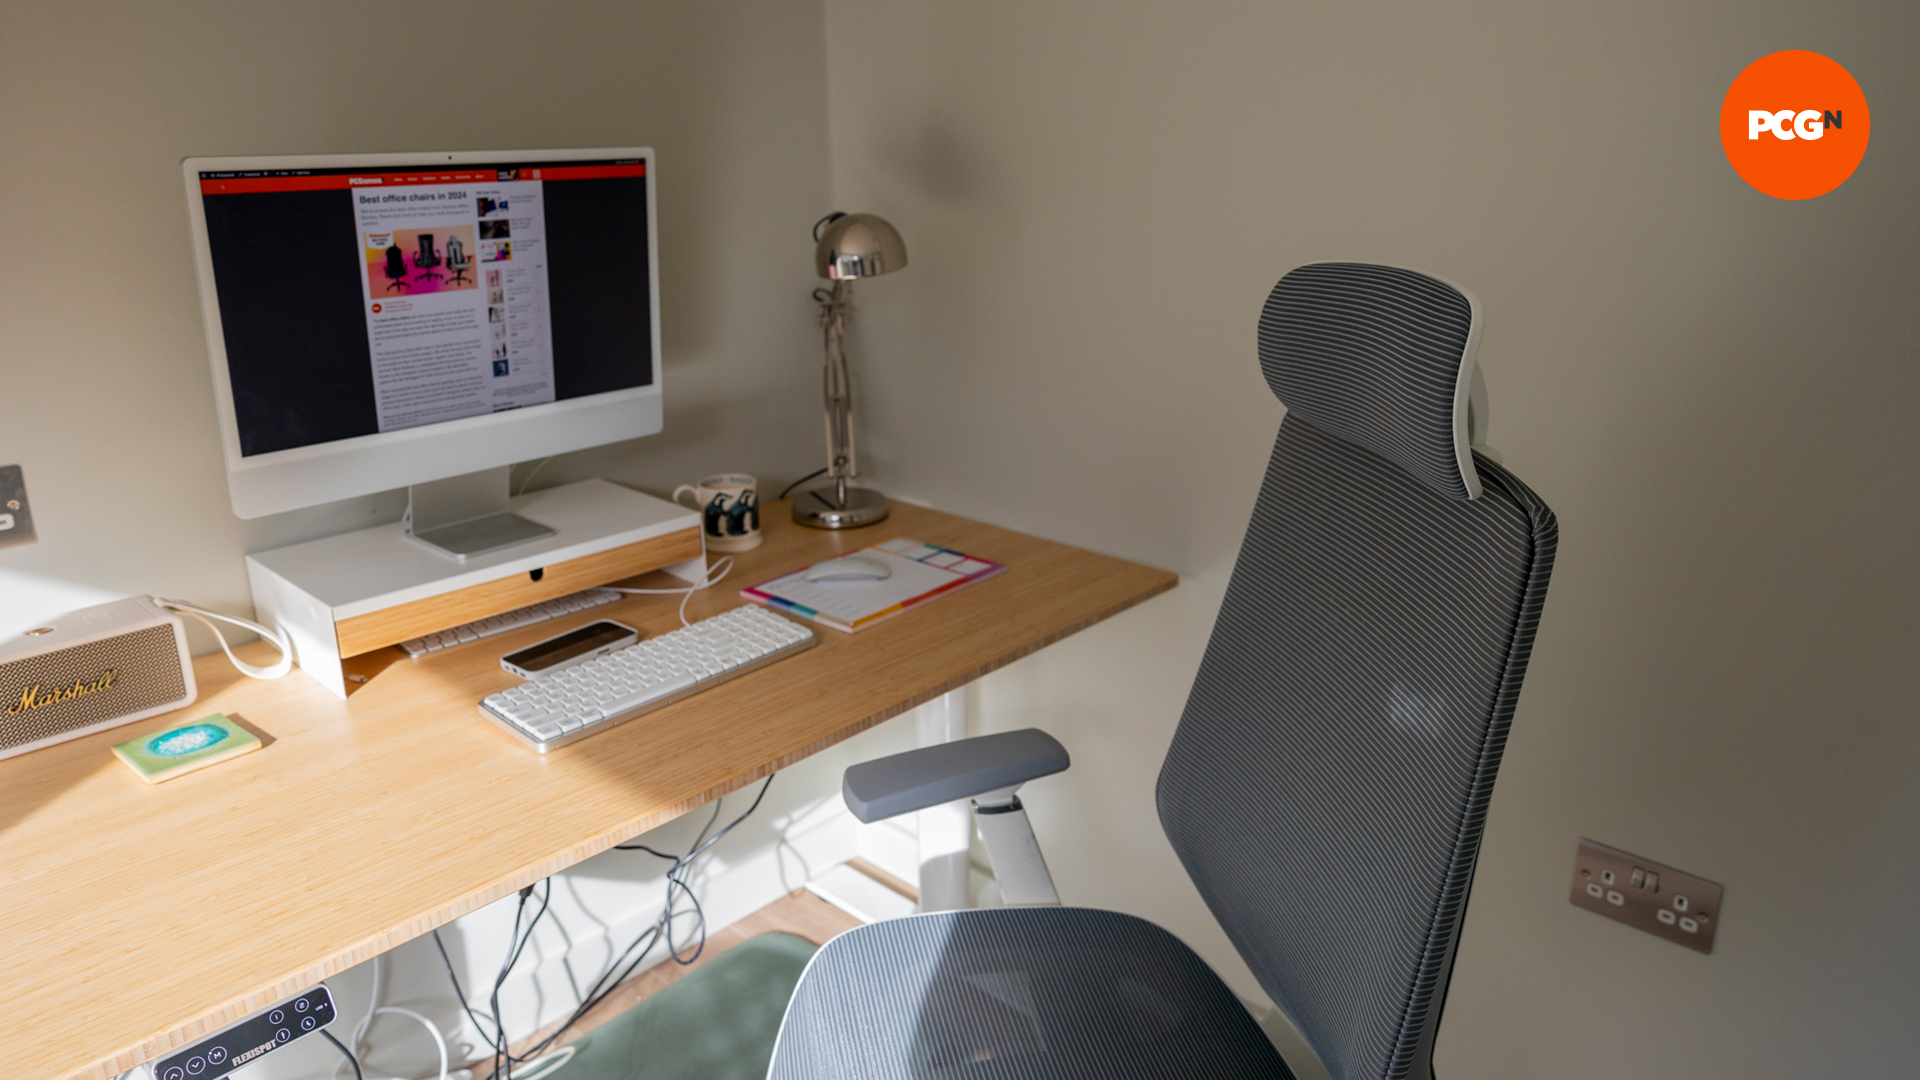 The FlexiSpot BS11 Pro chair in a home office